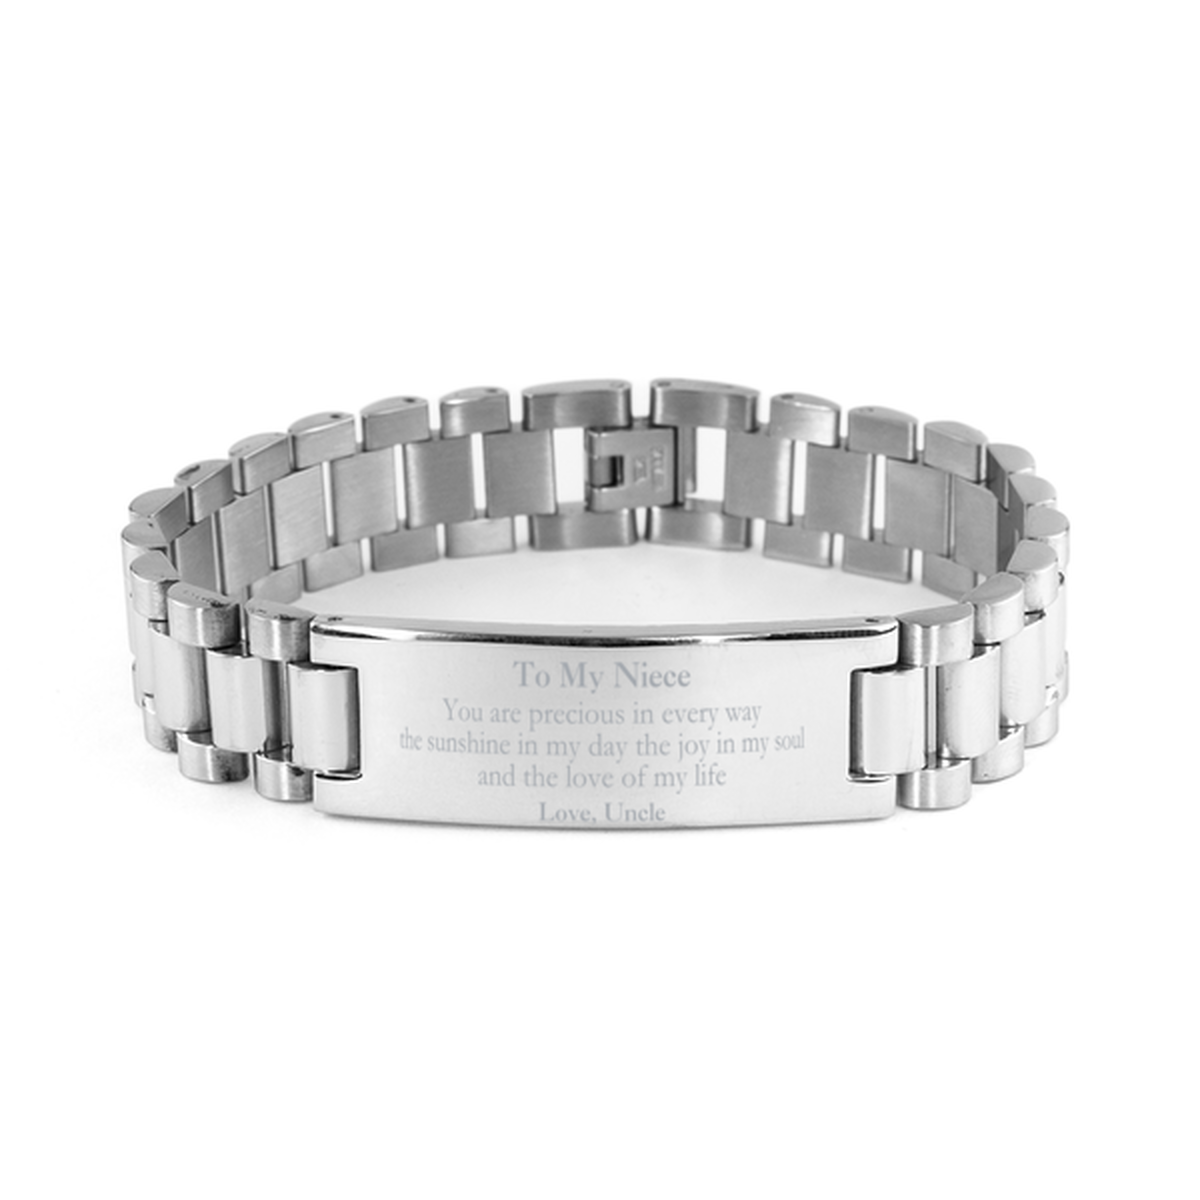 Graduation Gifts for Niece Ladder Stainless Steel Bracelet Present from Uncle, Christmas Niece Birthday Gifts Niece You are precious in every way the sunshine in my day. Love, Uncle